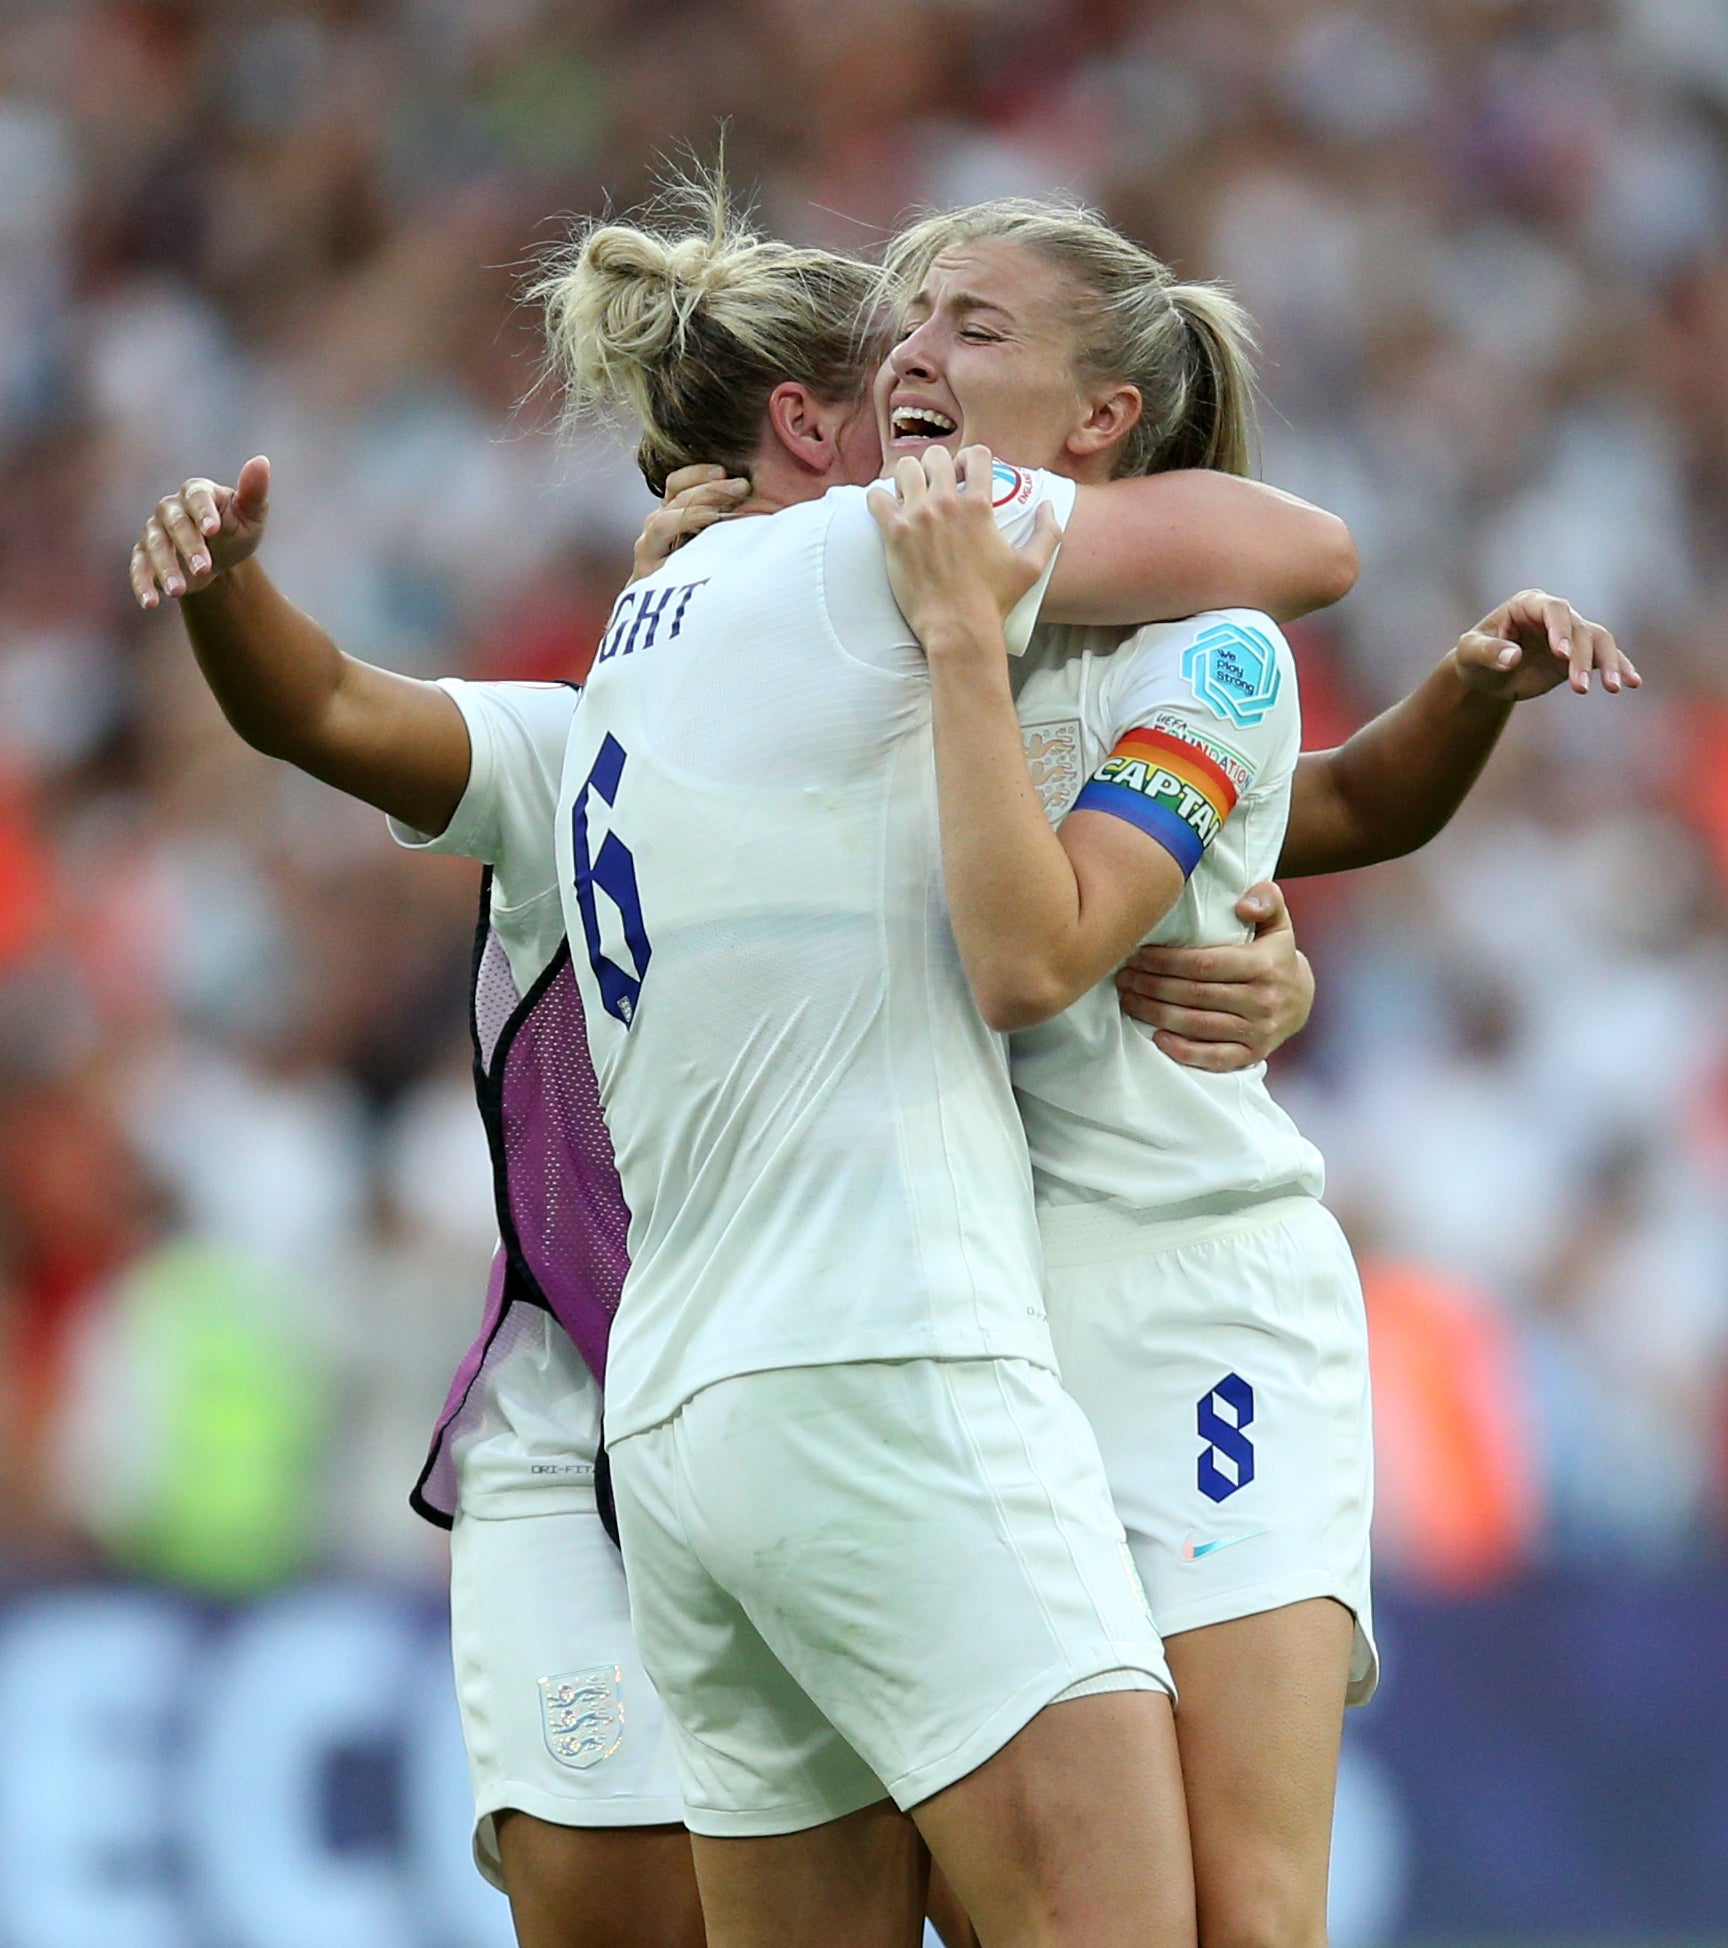 Football legends like Millie Bright and Leah Williamson are inspiring the next generation (Nigel French/PA)